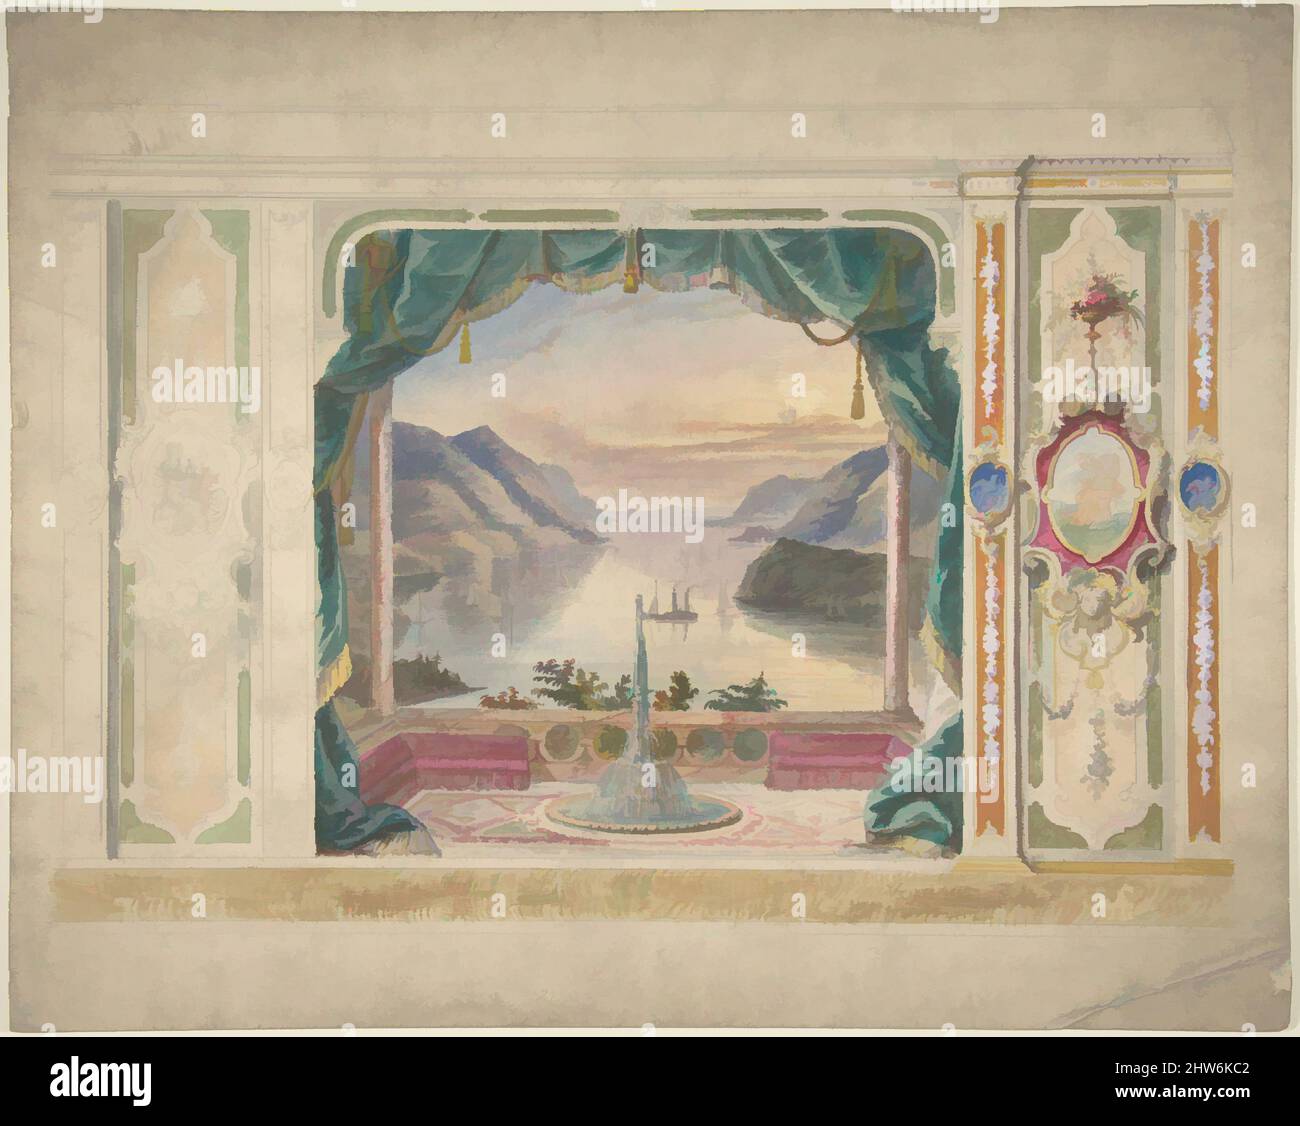 Art inspired by Wall Design with a Trompe l'Oeil Balcony Overlooking a Mountainous Harbor, 19th century, Ink and watercolor, Anonymous, British, 19th century, Classic works modernized by Artotop with a splash of modernity. Shapes, color and value, eye-catching visual impact on art. Emotions through freedom of artworks in a contemporary way. A timeless message pursuing a wildly creative new direction. Artists turning to the digital medium and creating the Artotop NFT Stock Photo